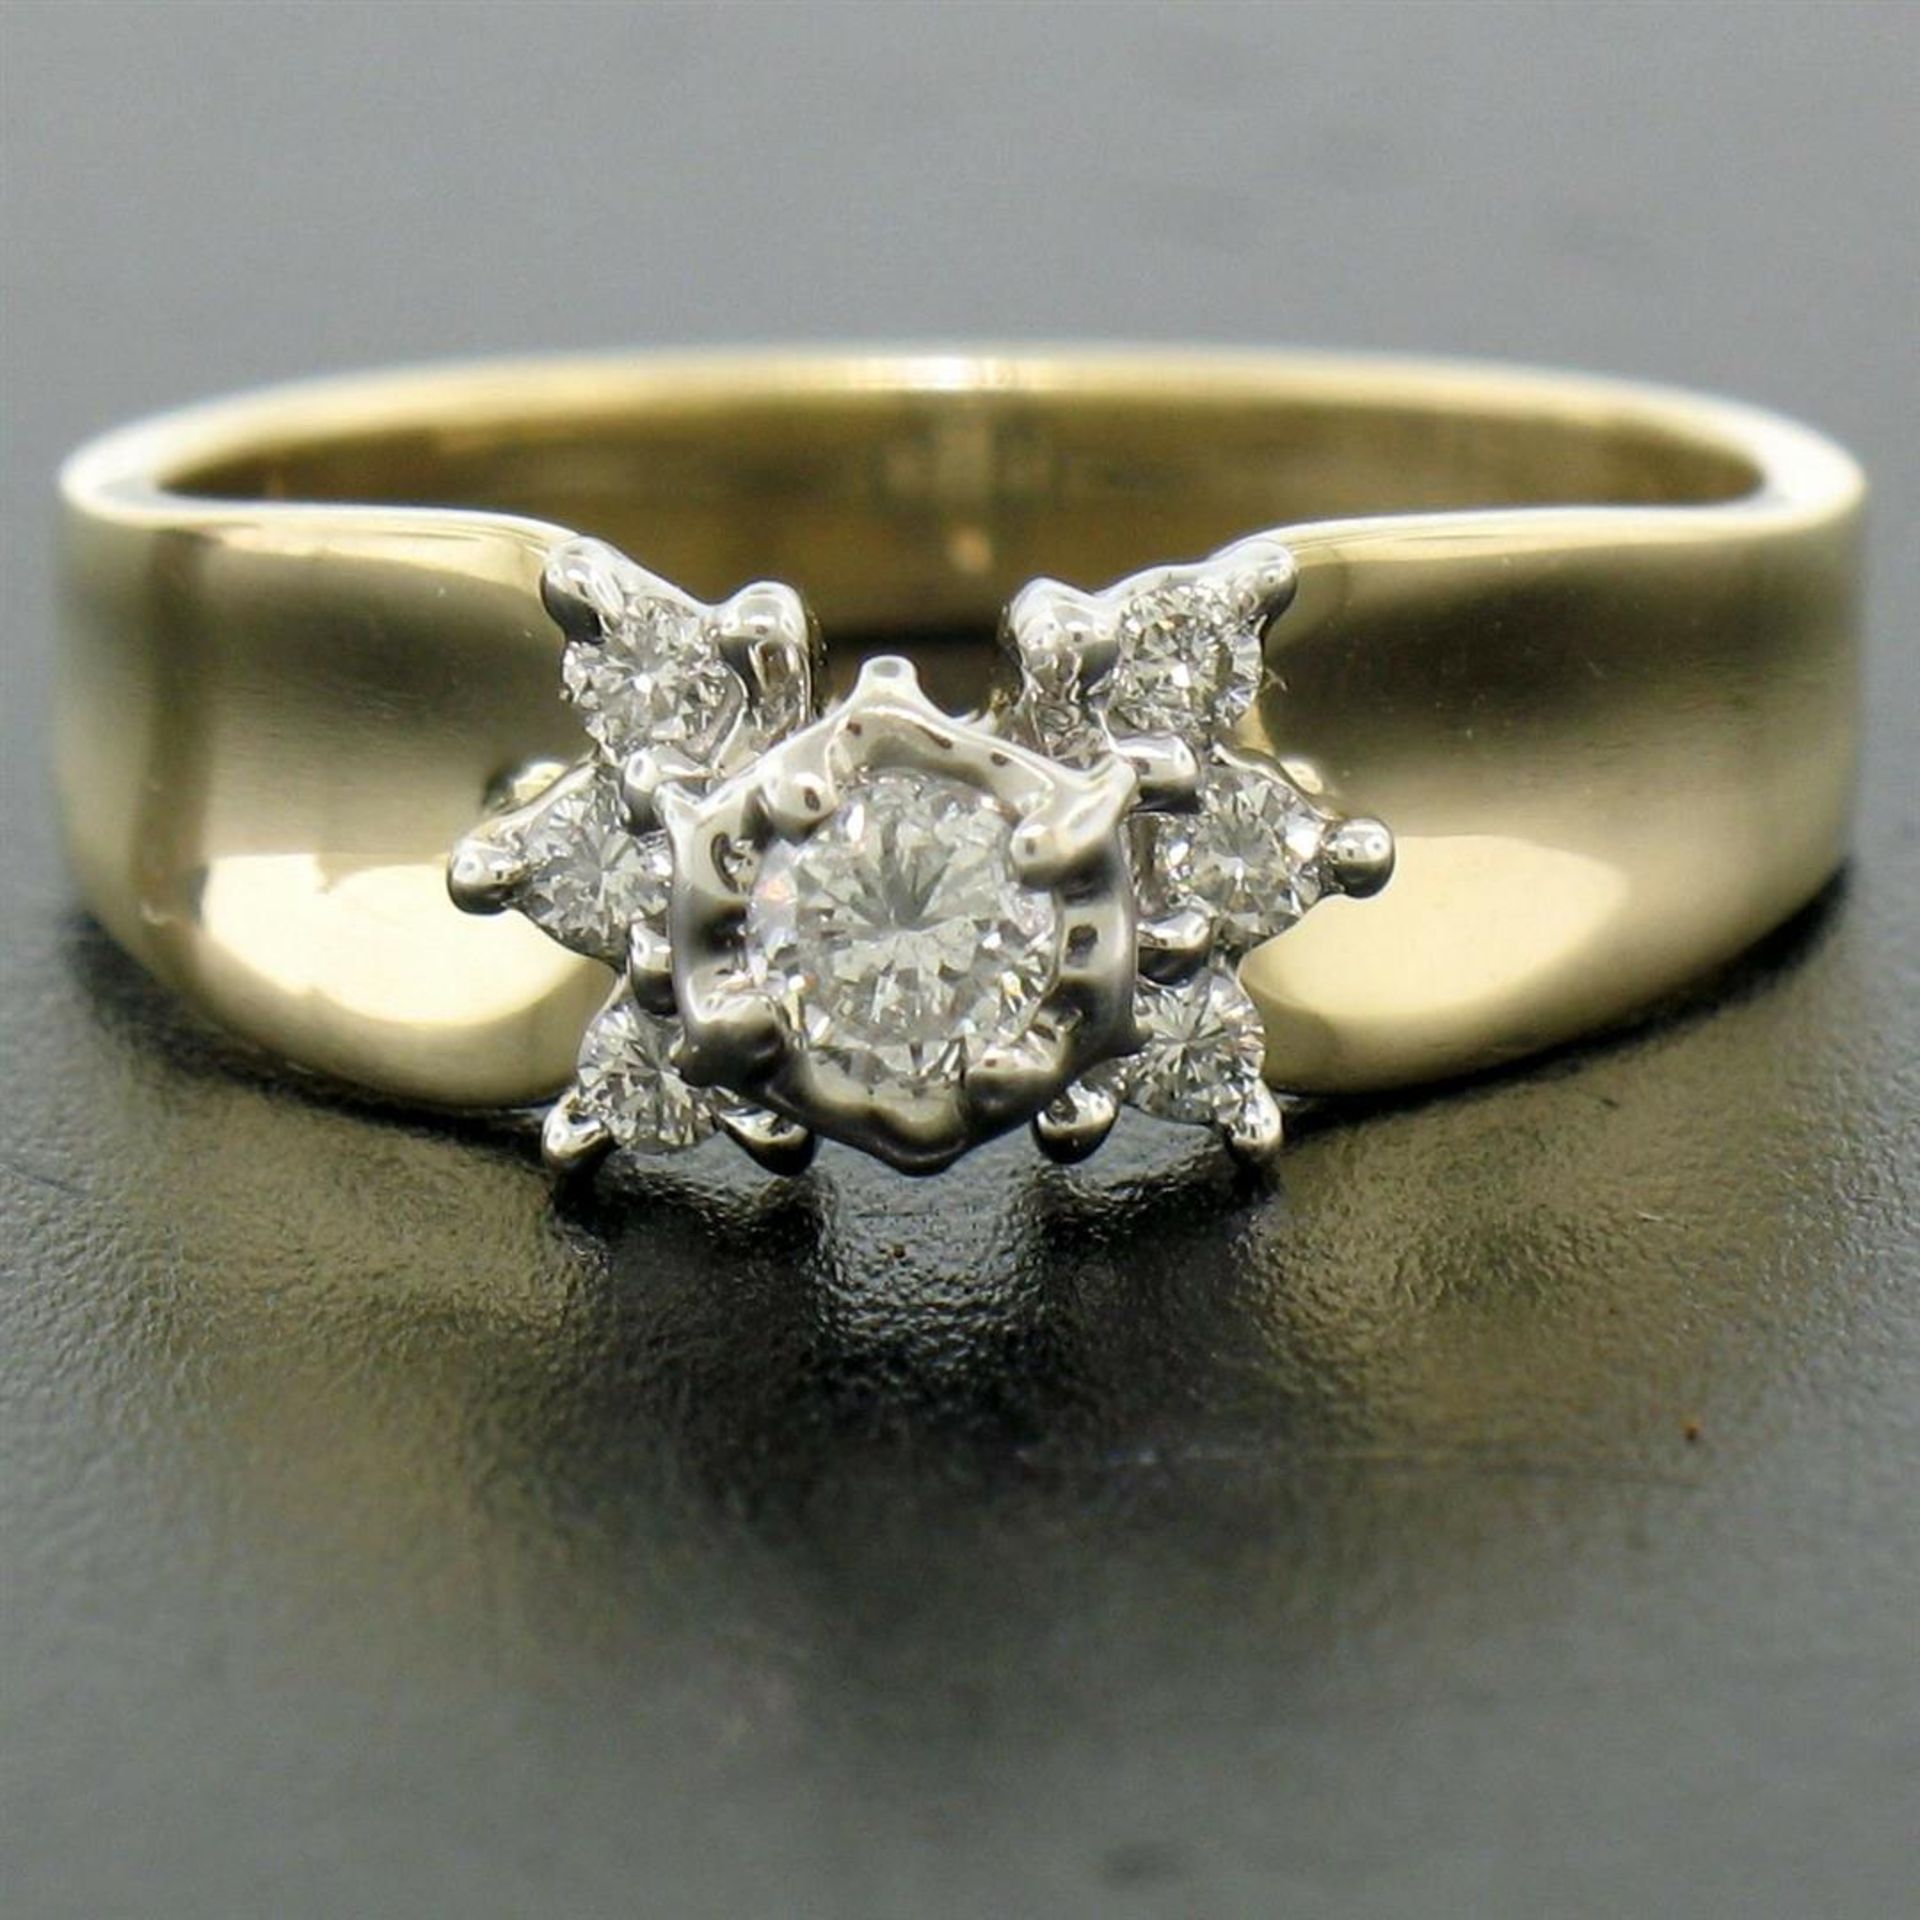 14k Two Tone Gold 0.30 ctw Illusion Set Solitaire Diamond Engagement Ring - Image 2 of 8